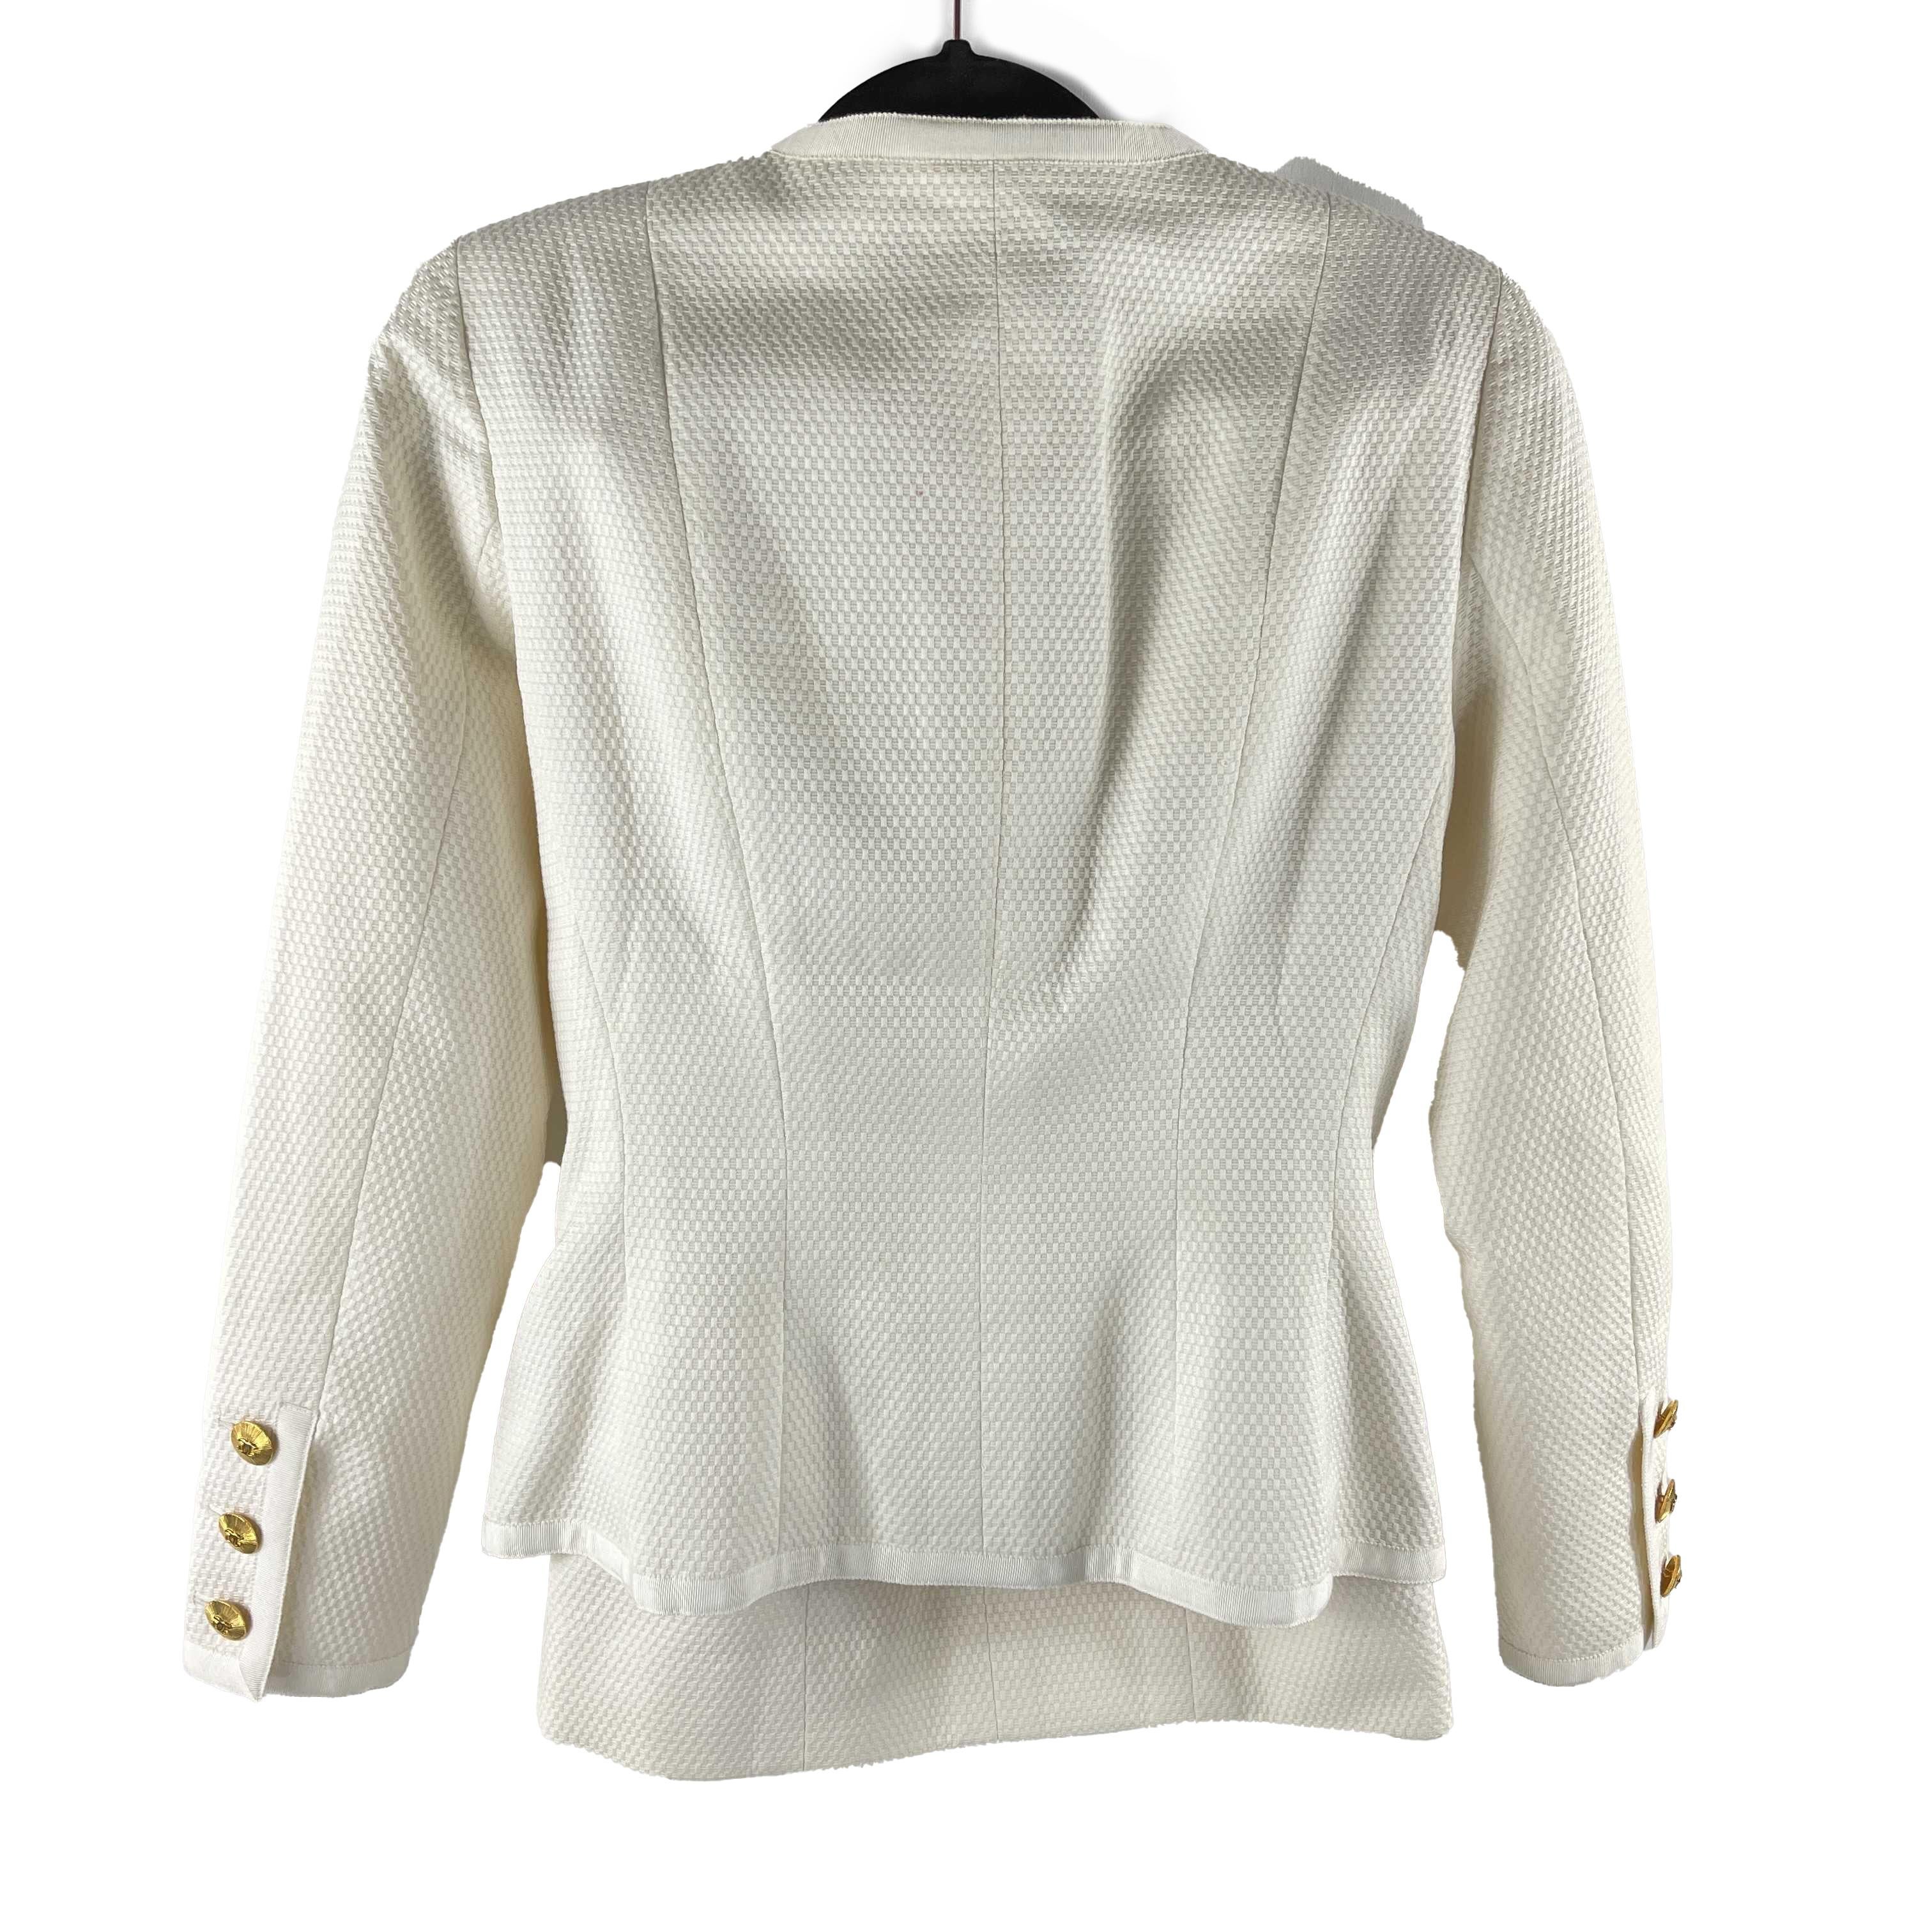 CHANEL - Very Good - Vintage Collection 27 Suit Jacket and Skirt - White, Gold-Toned Hardware - Jacket and Skirt: 38, US-6 - Set

Description

This vintage Chanel jacket and skirt suit set is from Collection 27 and was released sometime between